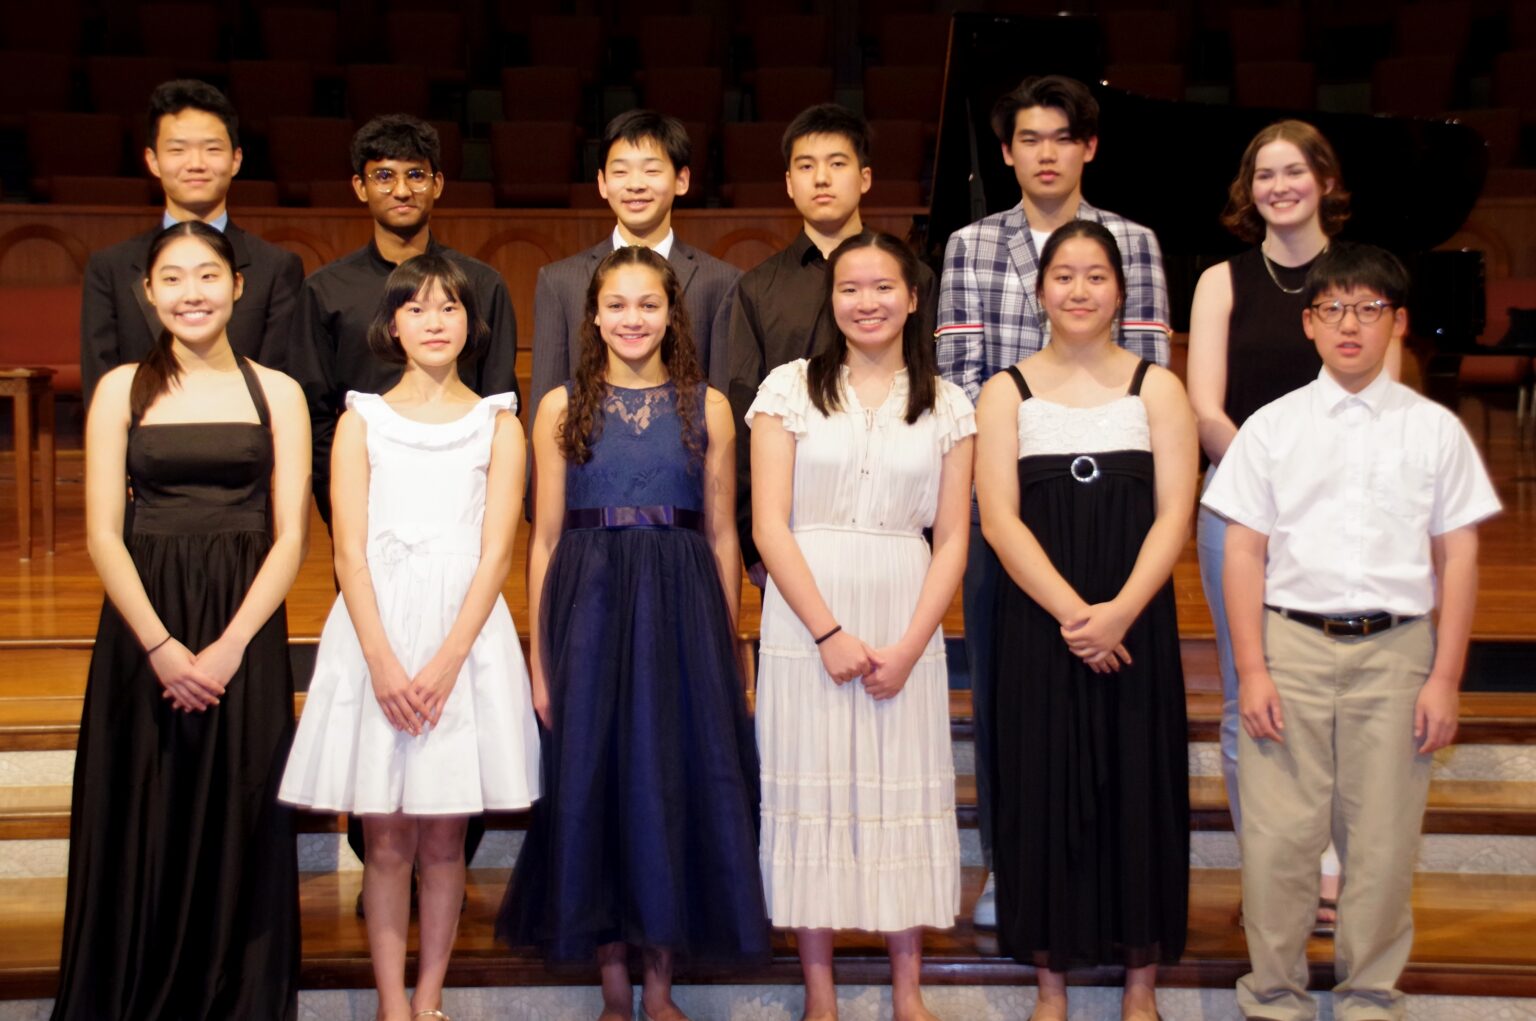 YOUNG ARTIST COMPETITION Plano Symphony Orchestra